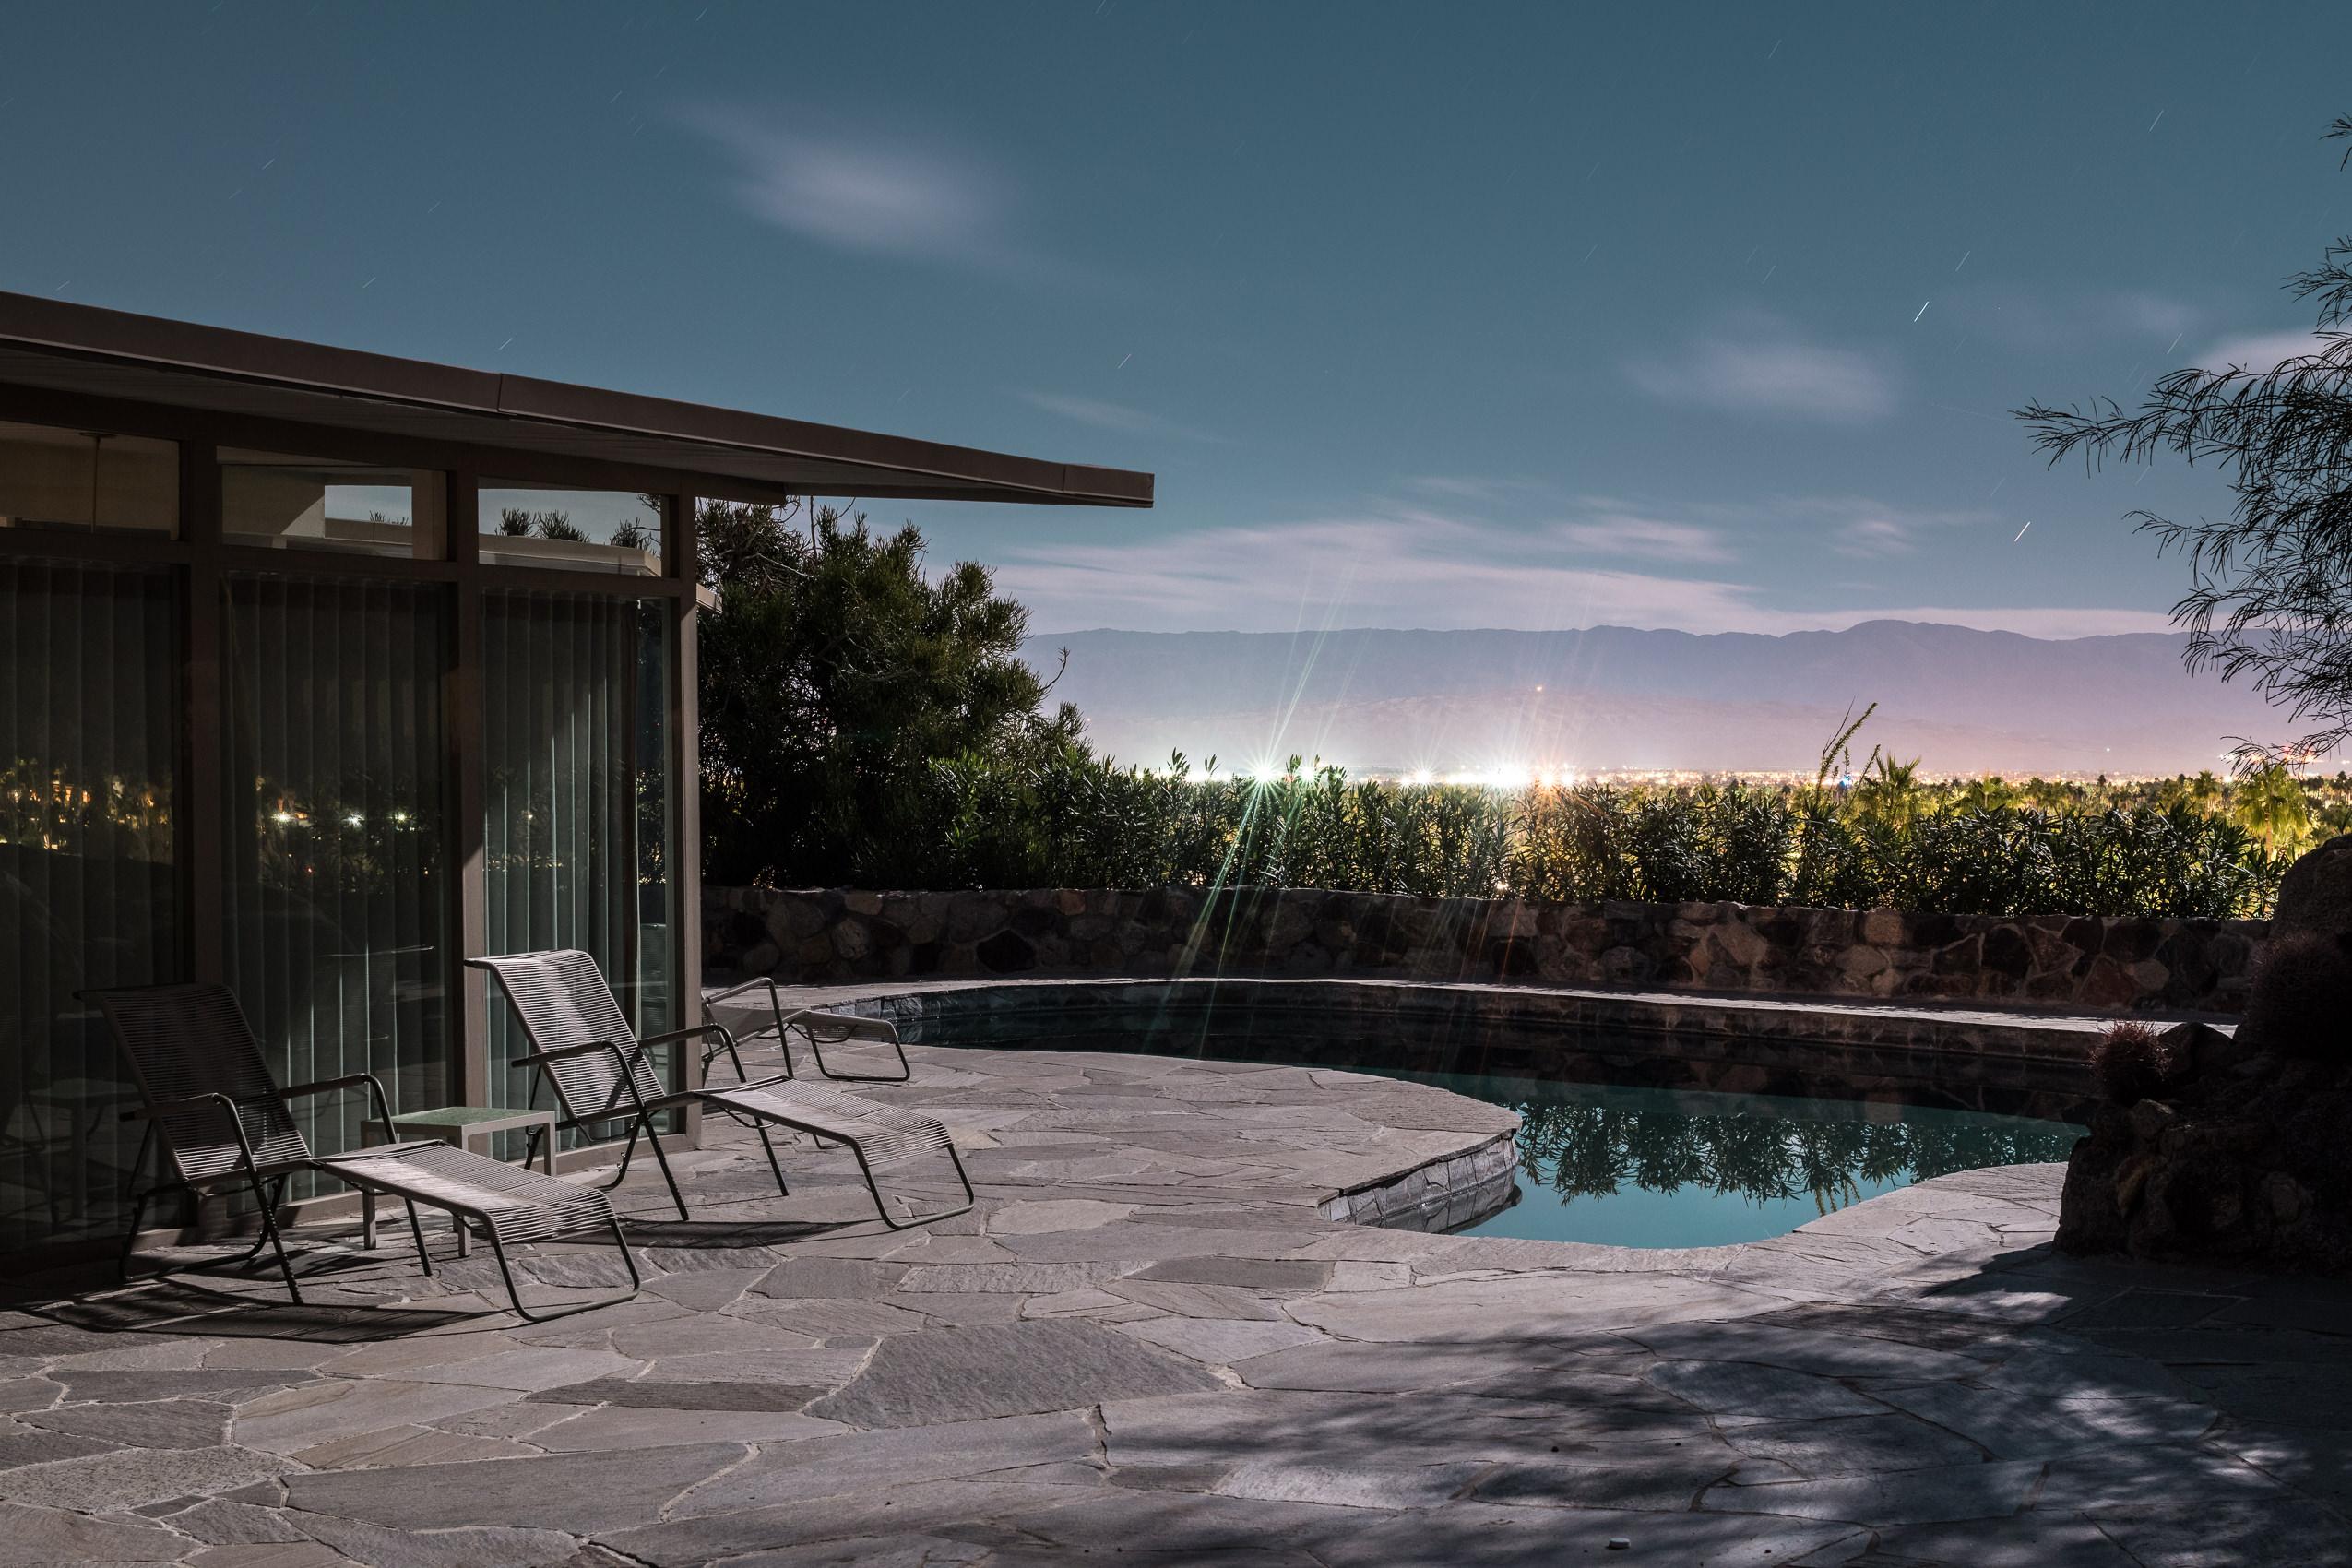 The latest and final release in Australian photographer Tom Blachford’s long-running project, Midnight Modern, will be exhibited for the first time at TOTH Gallery in New York.

Loosening the shackles of Palm Springs and Mid Century, Blachford’s new